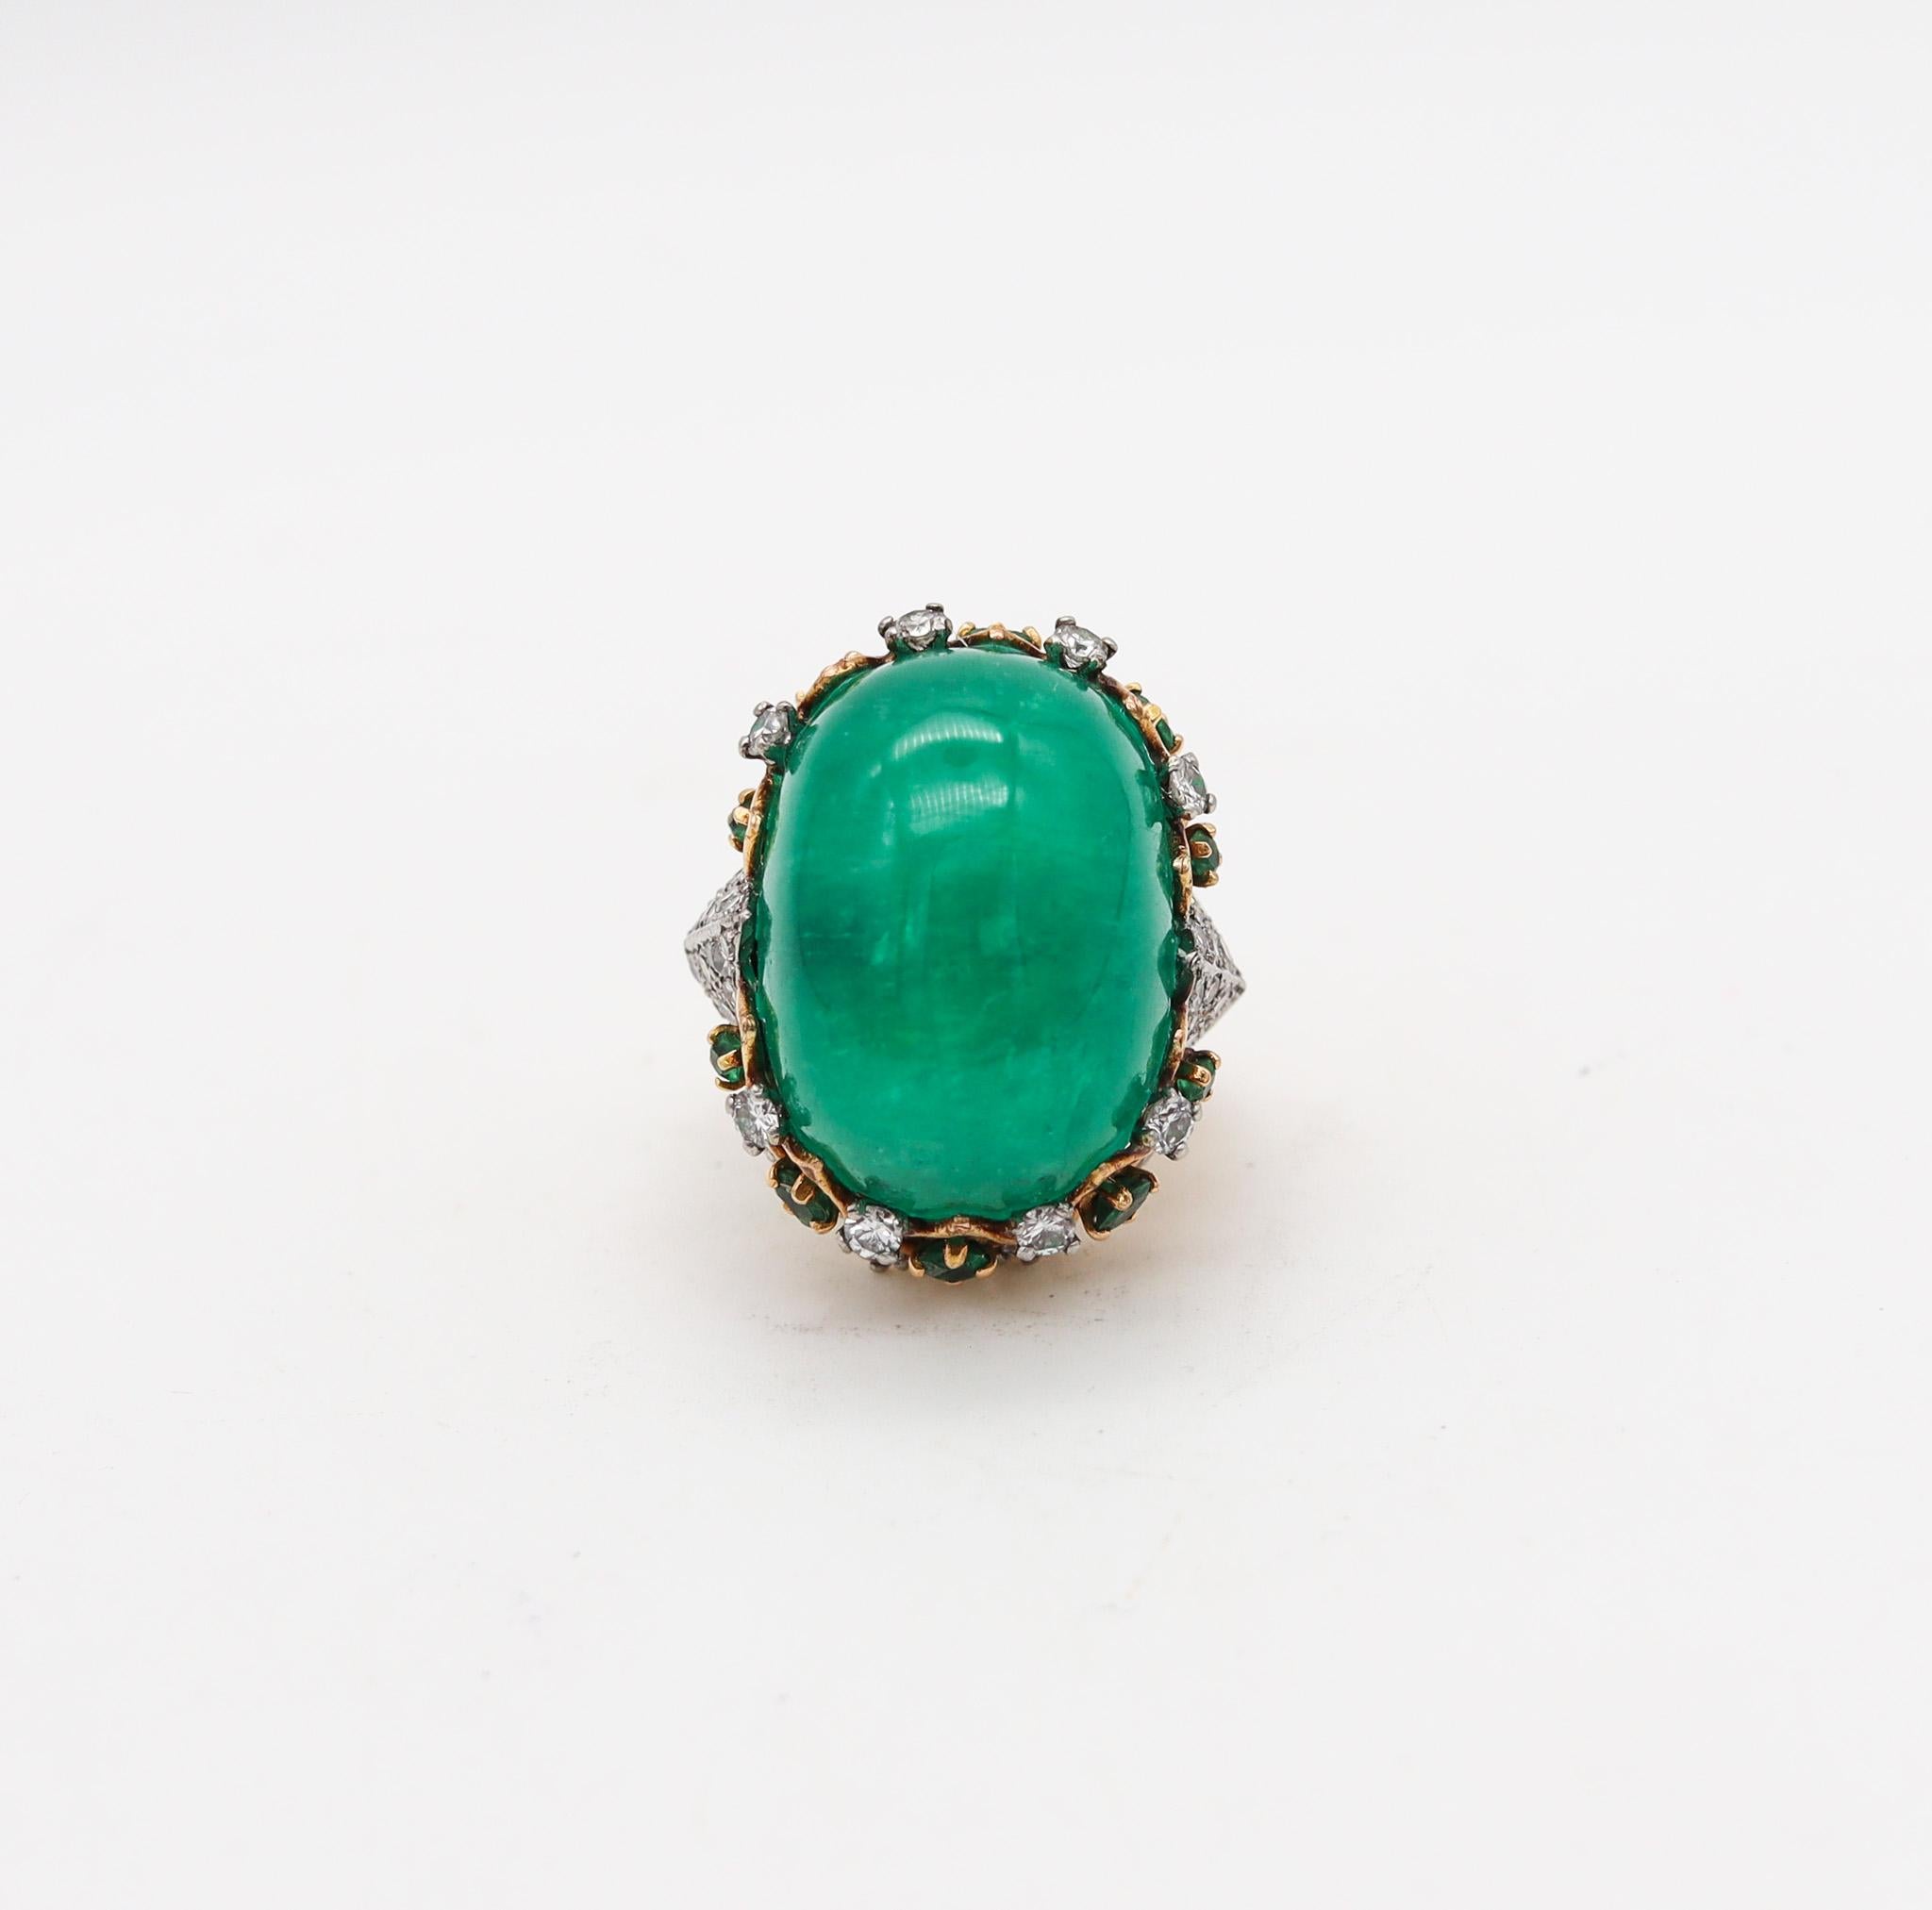 Cabochon Pierre Sterlé 1950 Modernist Ring In 18Kt Gold And 43.43 Ctw Emeralds & Diamonds